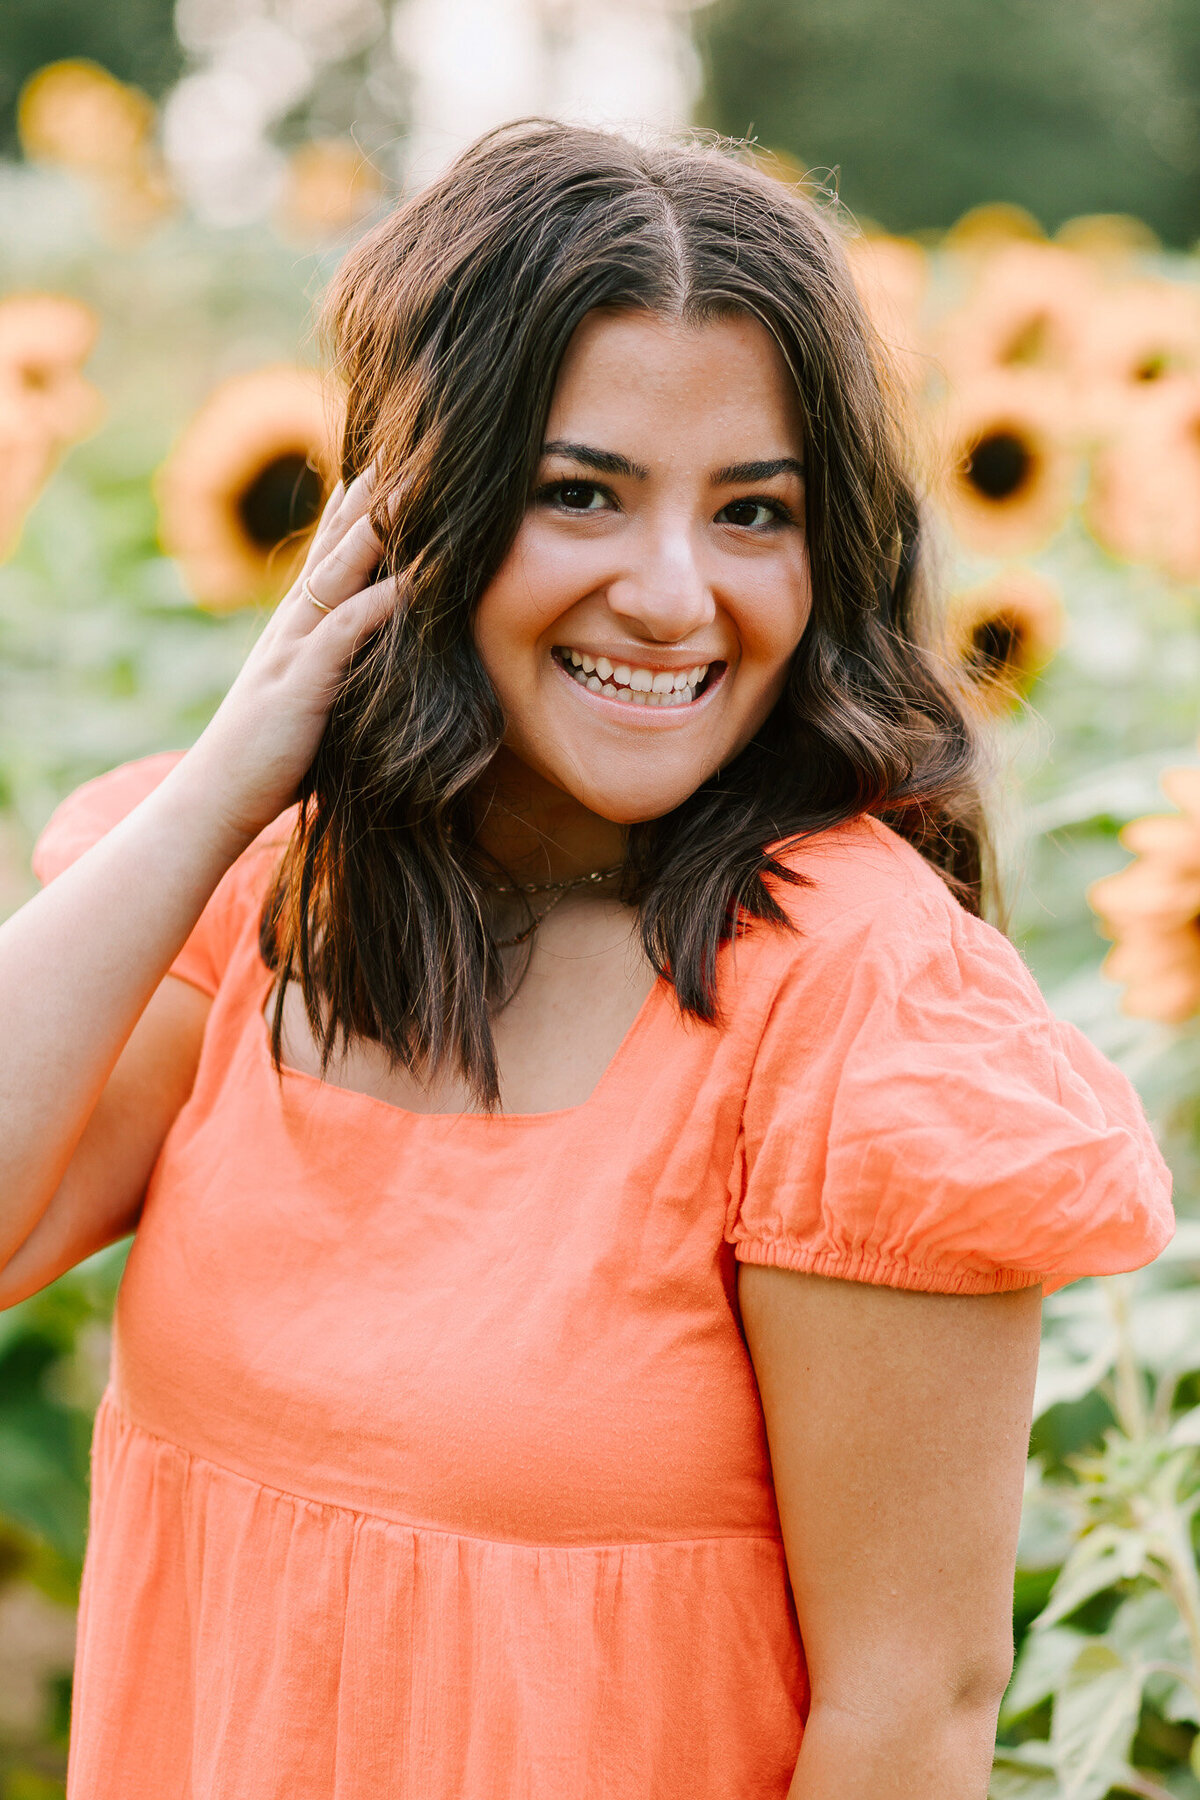 A teenage girl in a coral dress stands in a sunflower field laughing with her hand in her har